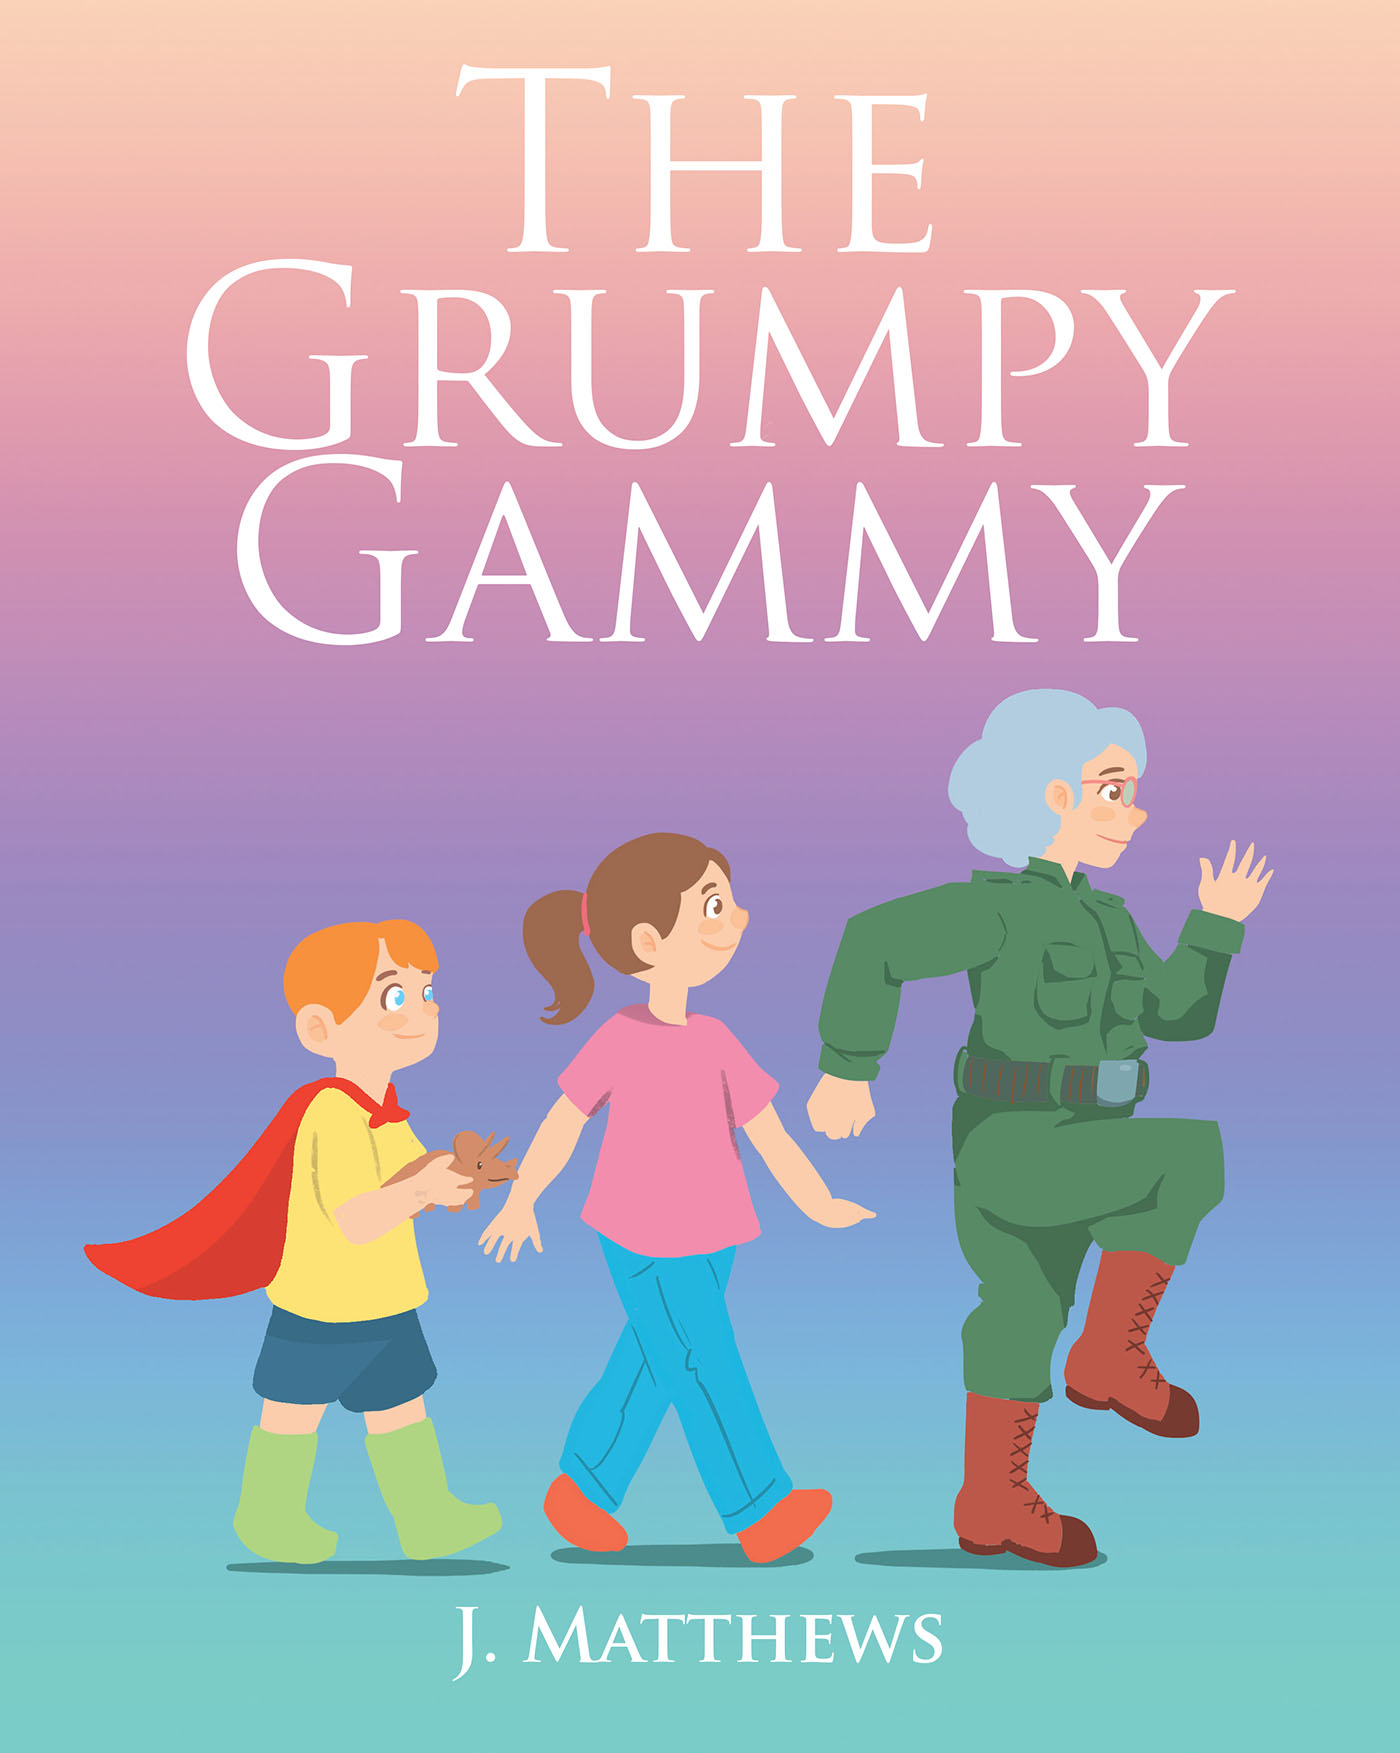 J. Matthews’s Newly Released "The Grumpy Gammy" is an Enjoyable Opportunity for Discussion Key Concepts Like Respect and Compassion